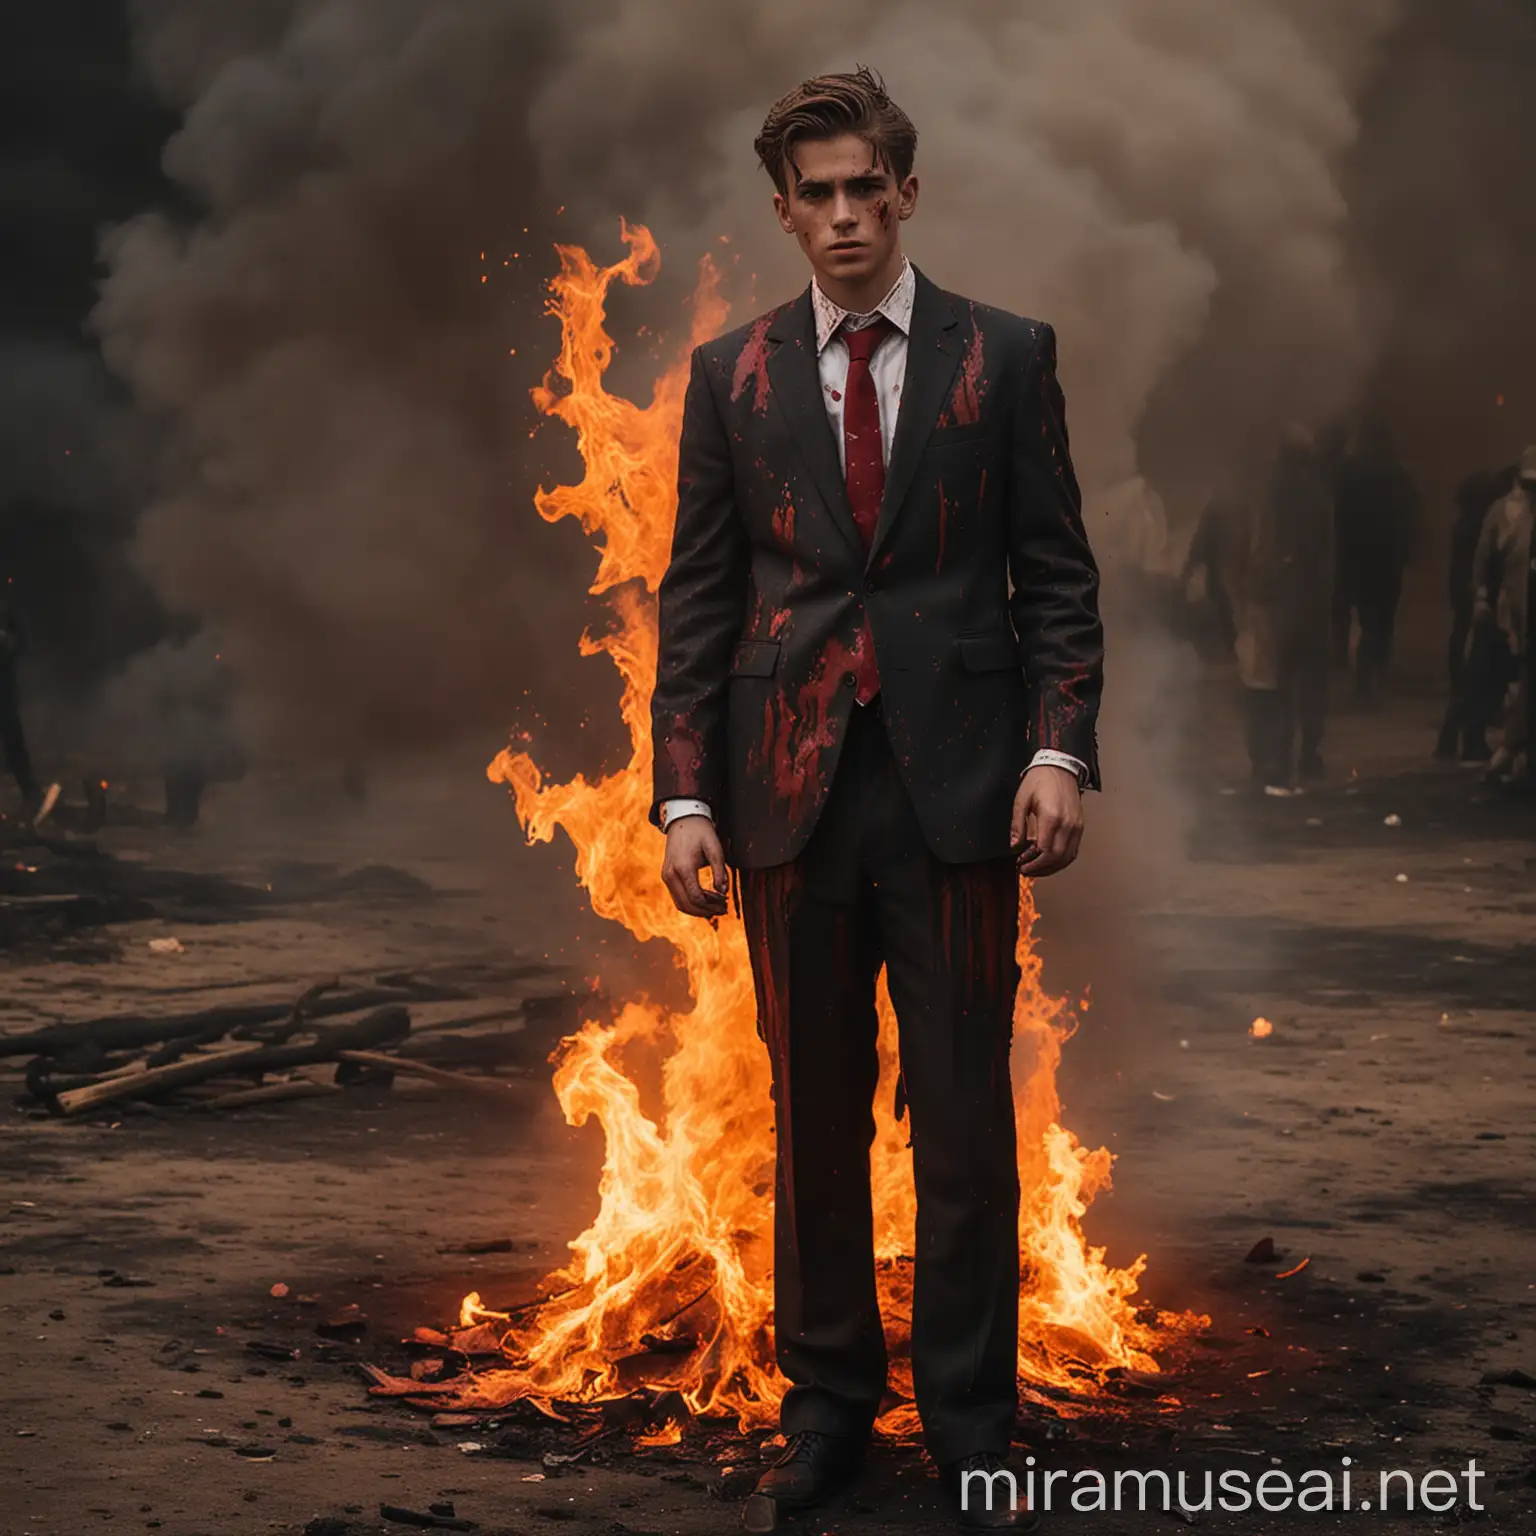 a young man wearing a suit and standing on fire with some blood on his suit